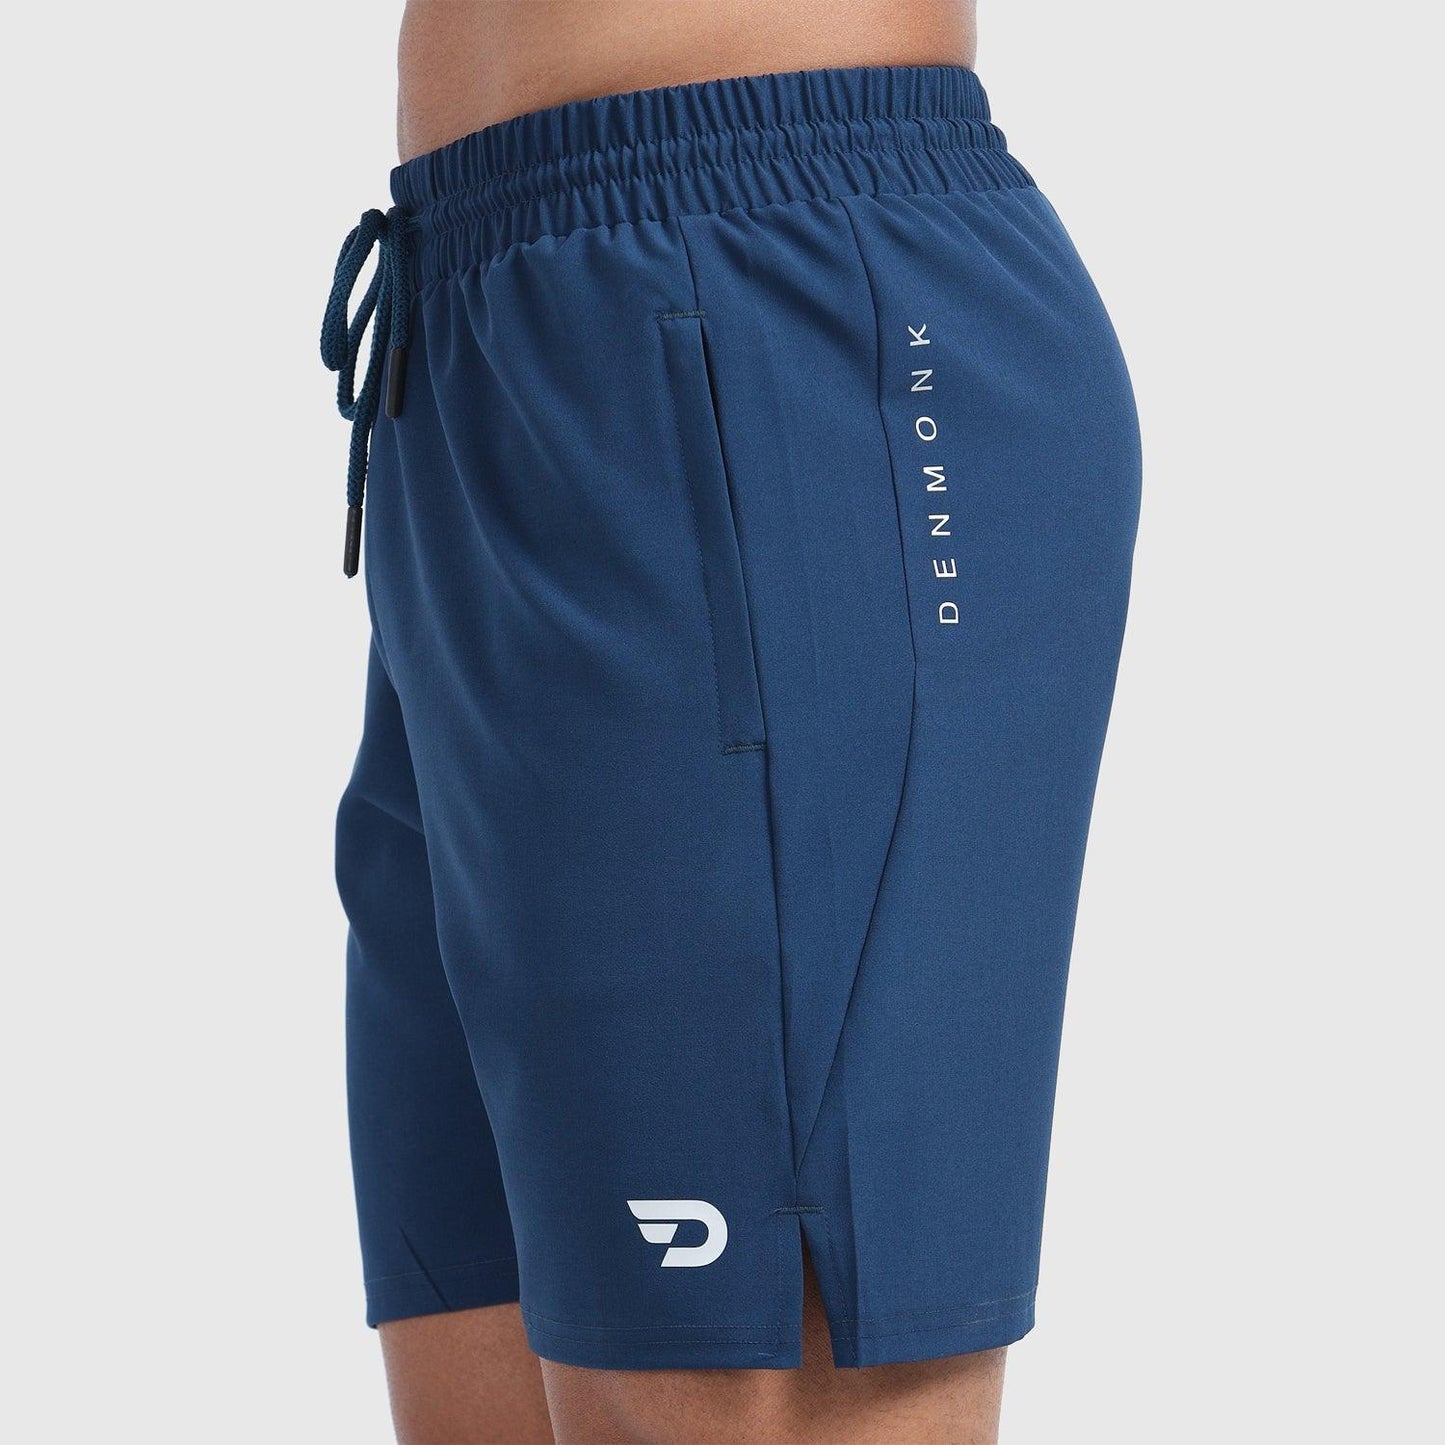 Denmonk's fashionable Coastline Comfort regal blue for men will boost your level of gym fitness.